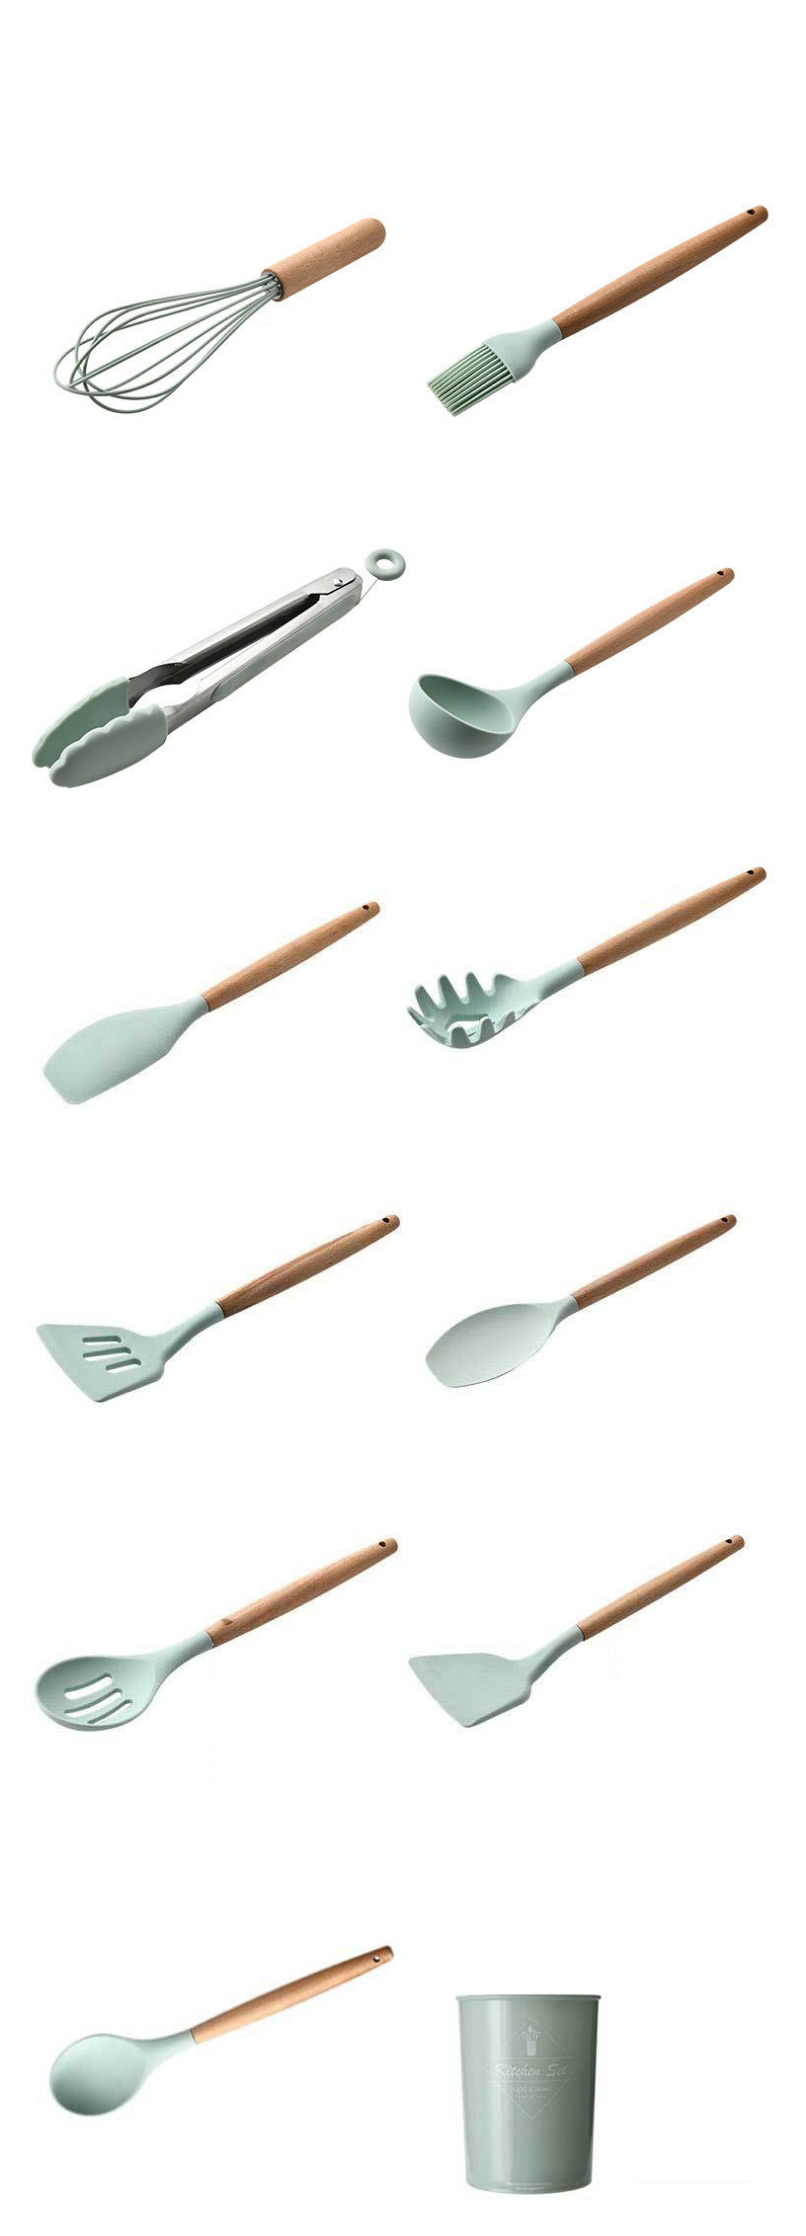 Fashion The 9 Piece B Does Not Contain The Bucket Storage Of Barrels Wooden Handle Silicone Non Stick Turner Kitchenware Sets,Kitchen